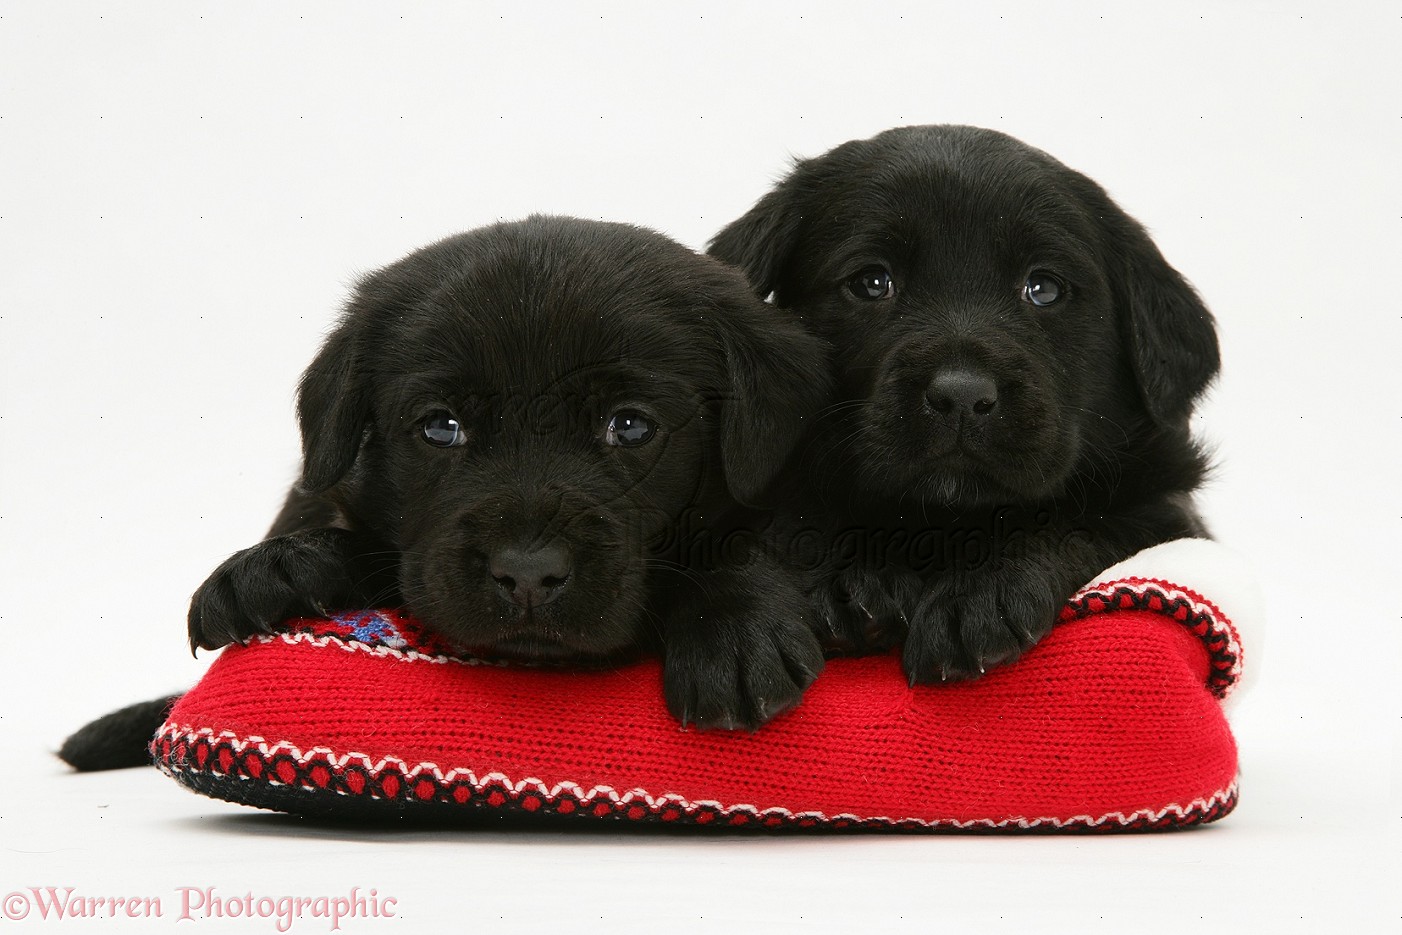 30280-Two-Black-Labrador-Retriever-puppies-in-a-knitted-slipper-white-background.jpg